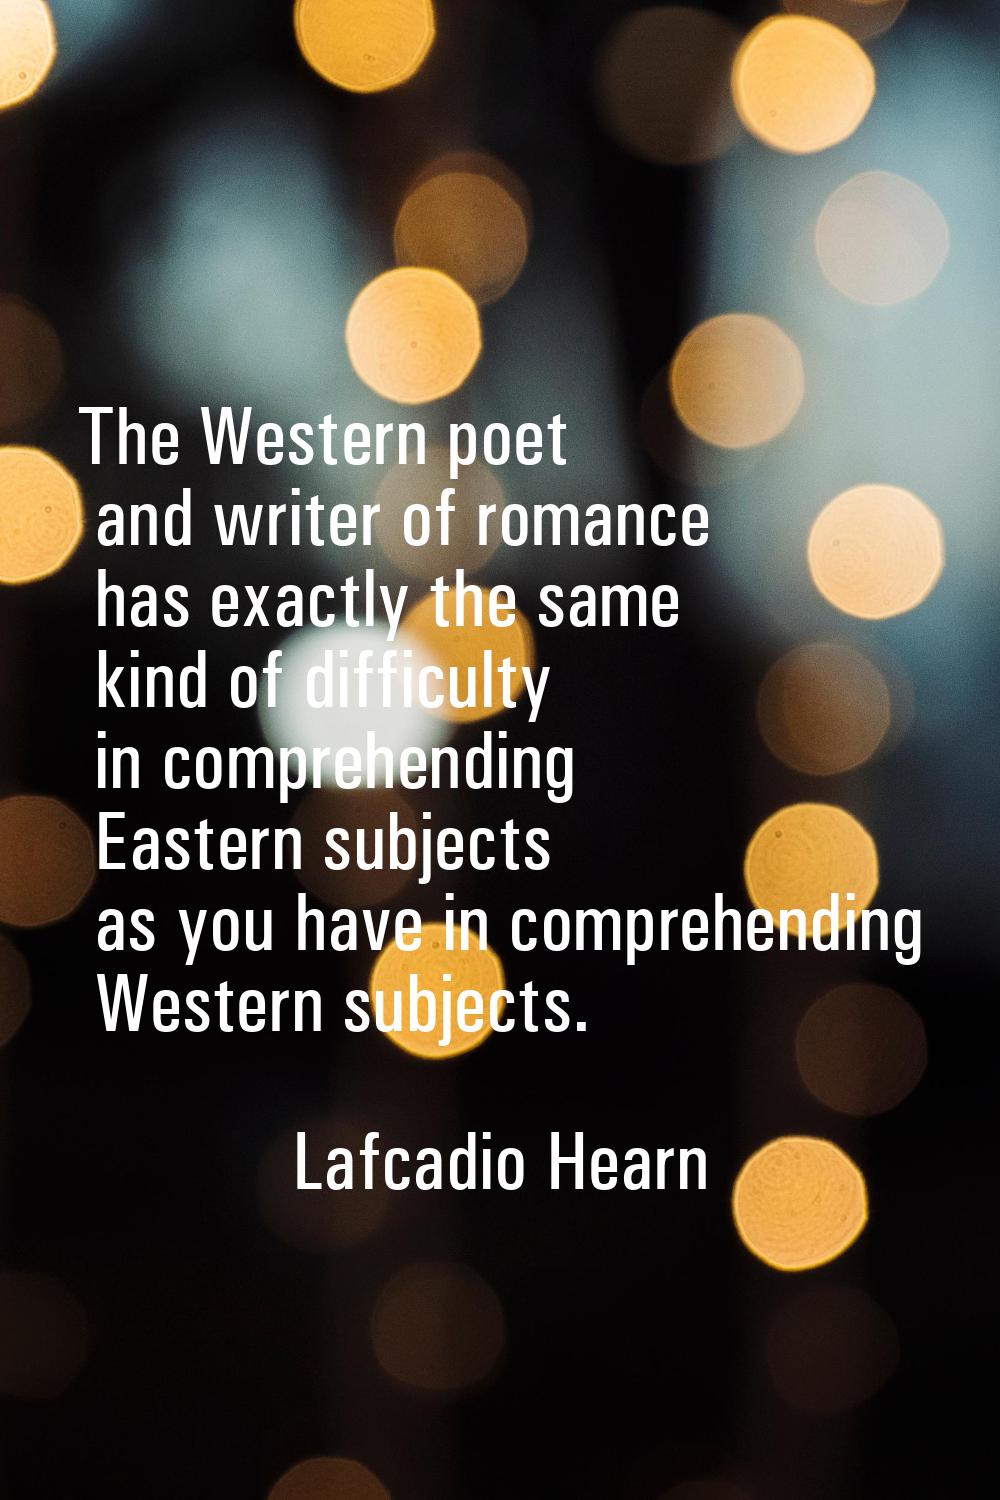 The Western poet and writer of romance has exactly the same kind of difficulty in comprehending Eas